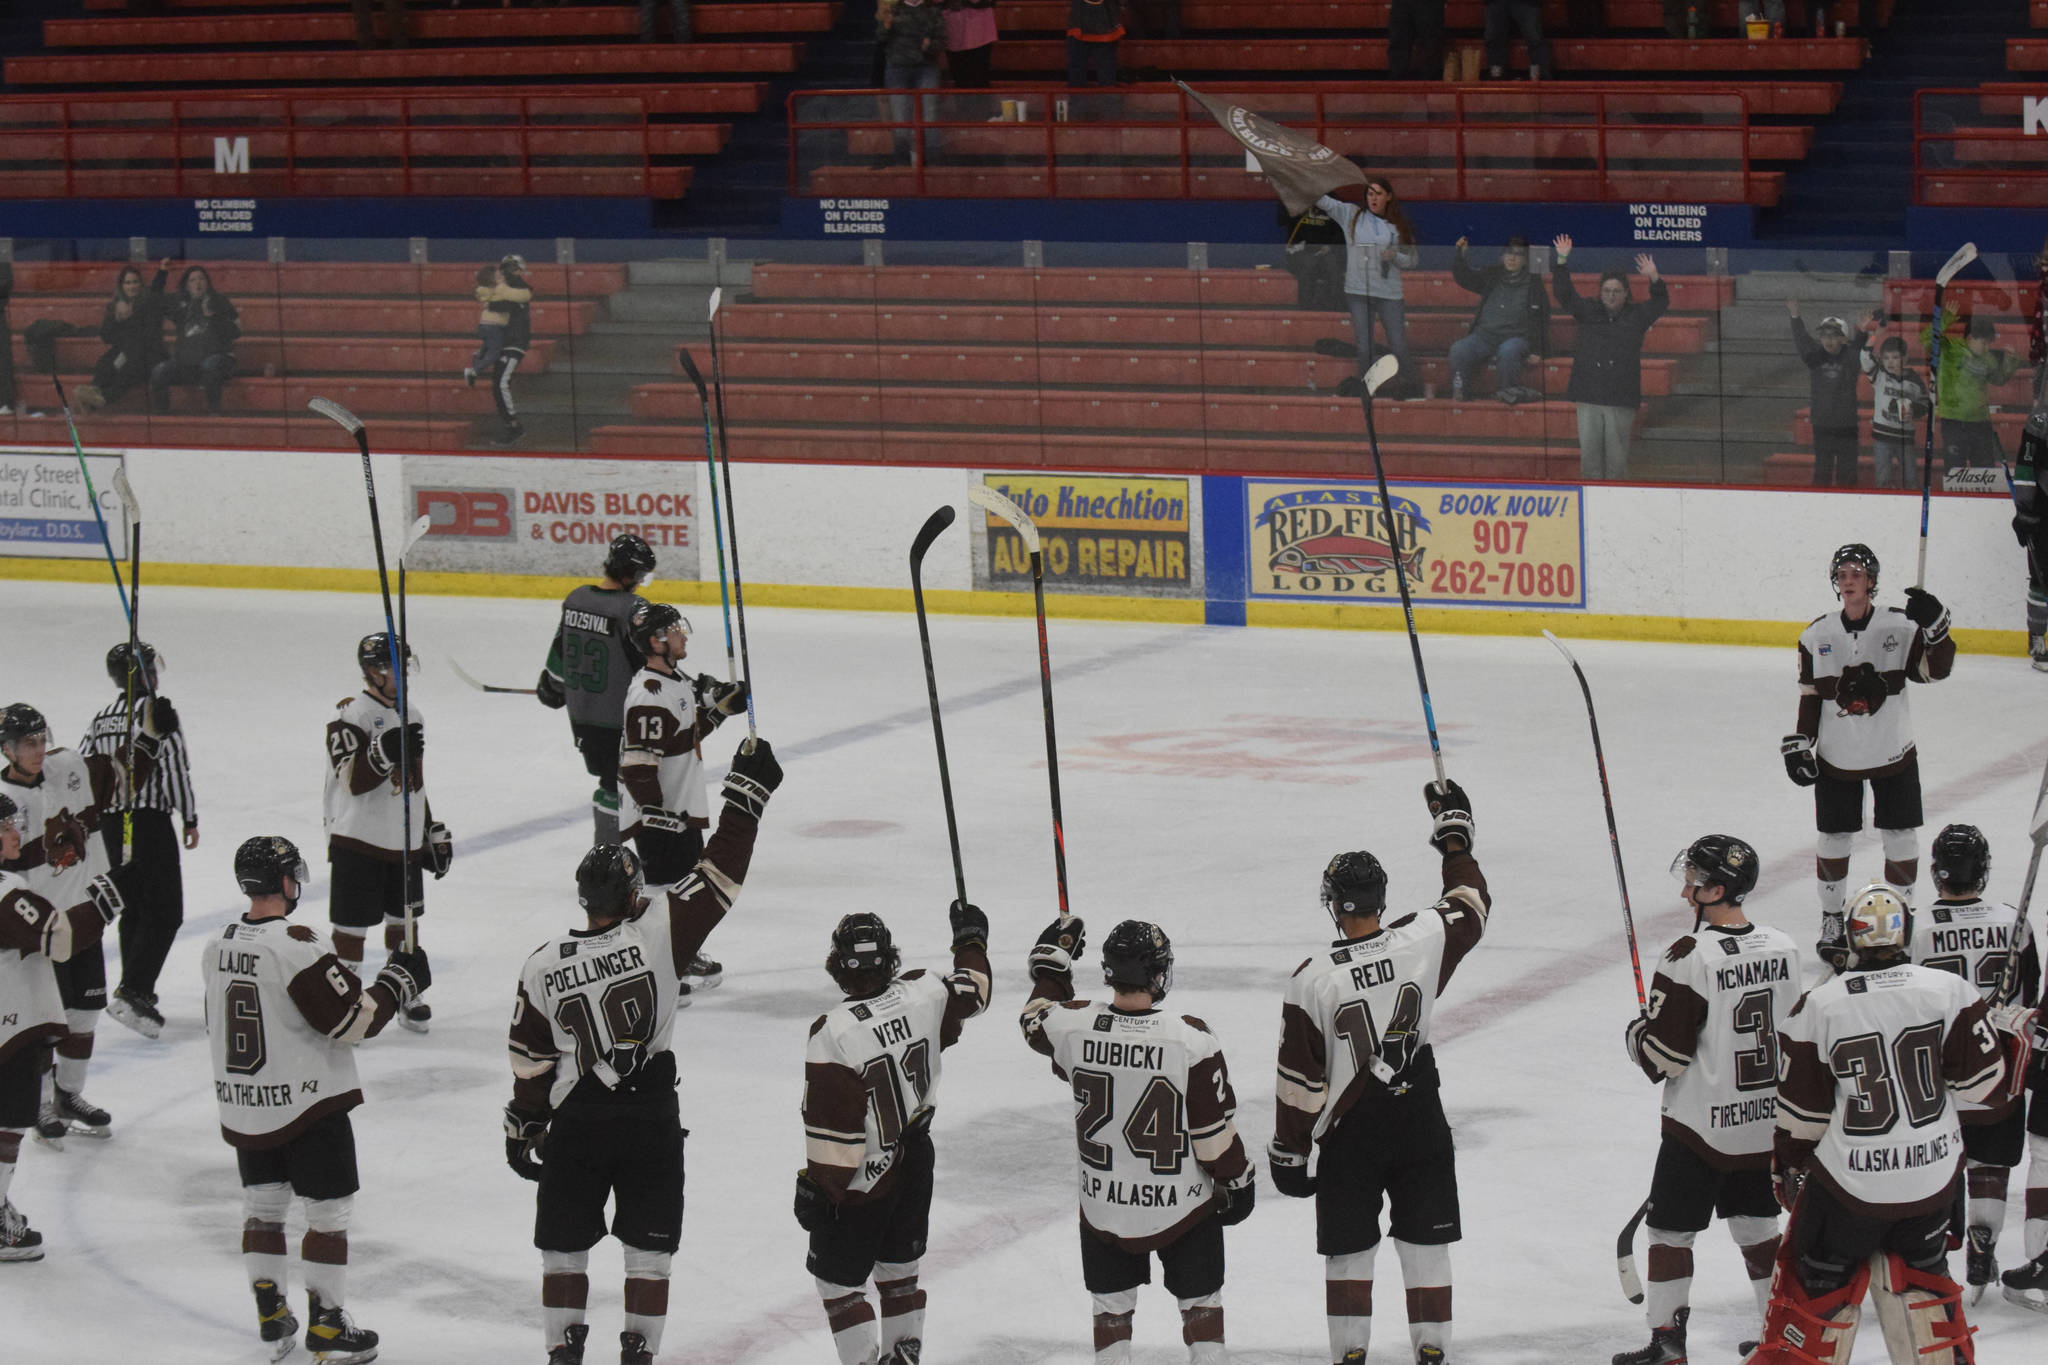 Jeff Helminiak / Peninsula Clarion
The Kenai River Brown Bears salute seats mostly empty due to coronavirus mitigation measures after a victory over the Chippewa (Wisconsin) Steel on April 23 at the Soldotna Regional Sports Complex in Soldotna.